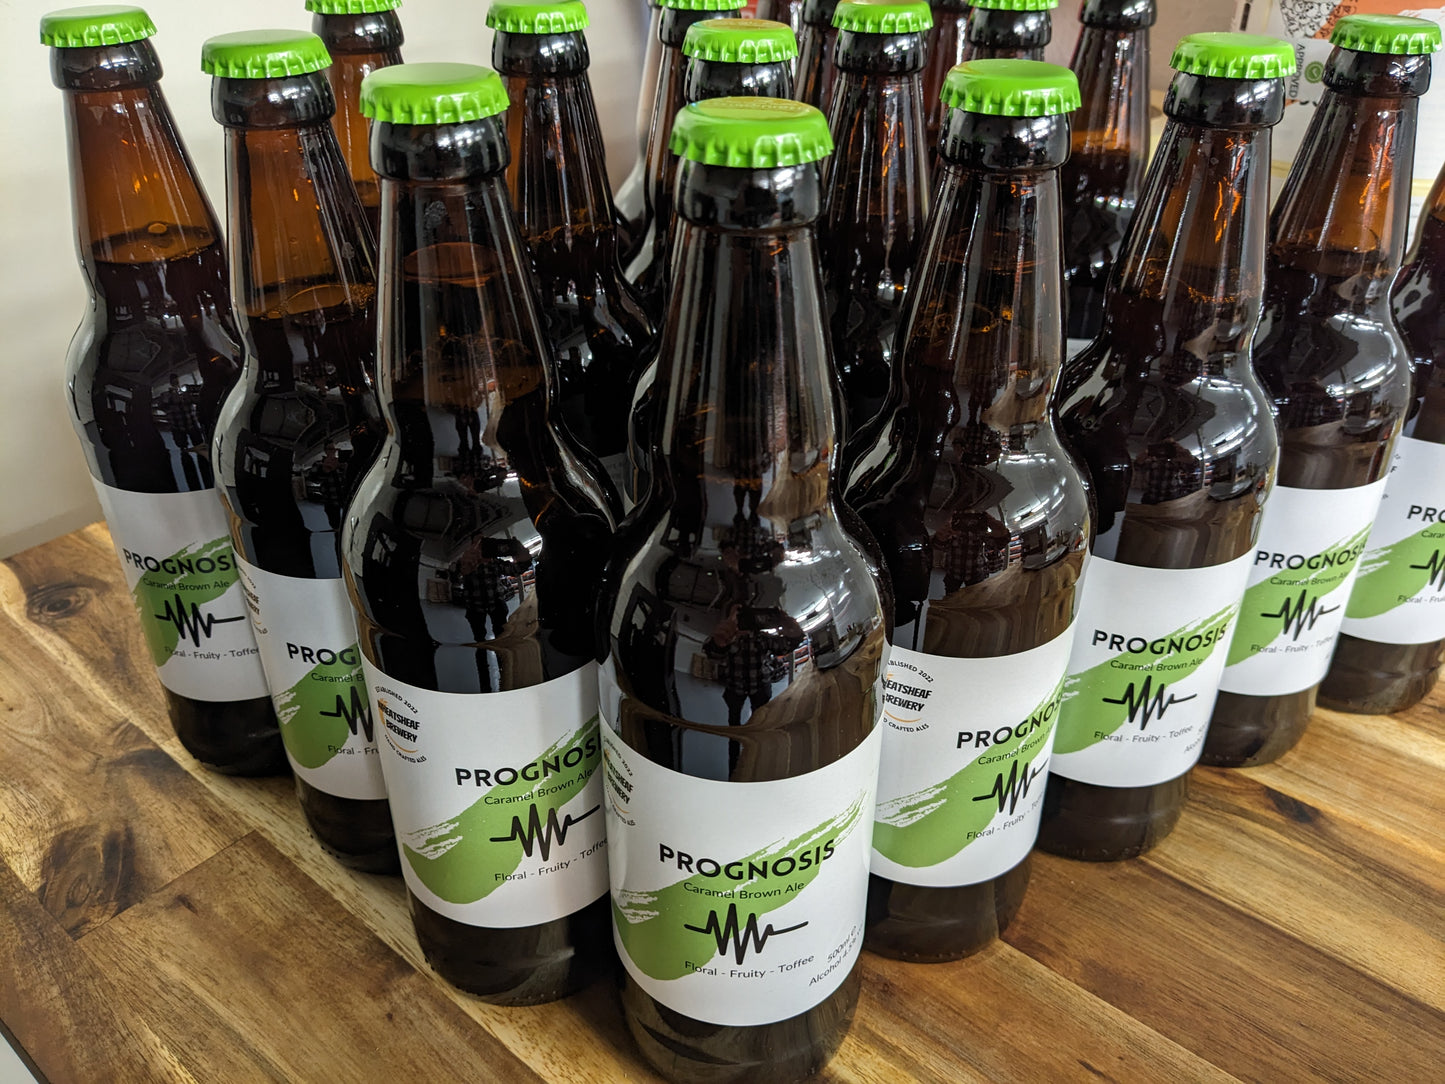 Prognosis brown ale bottles arranged in a triangle on a wooden bench. Bottle conditioned real ale brewed locally in Huntingdon, Cambridgeshire